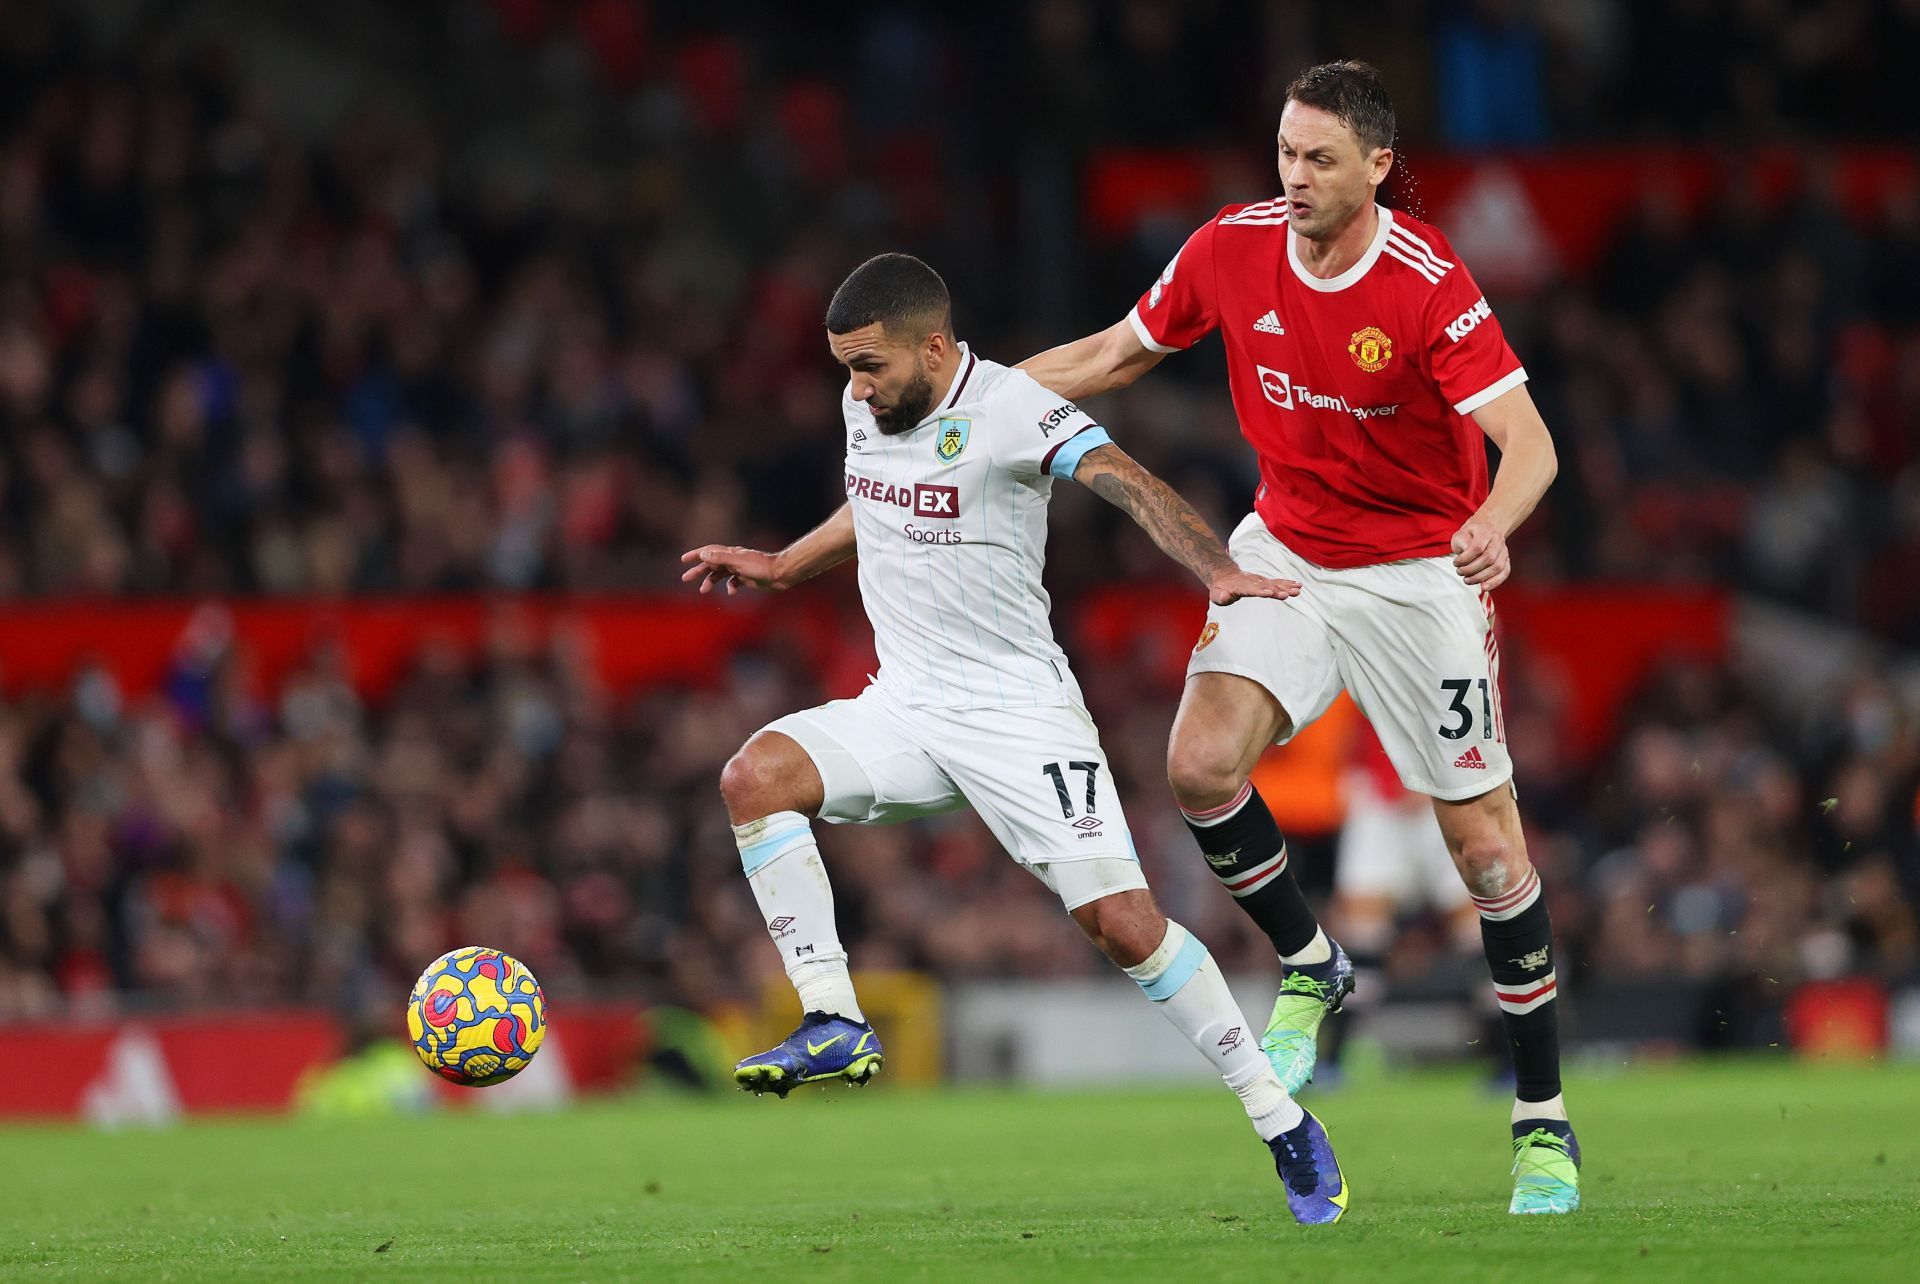 Nemanja Matic in action for Manchester United